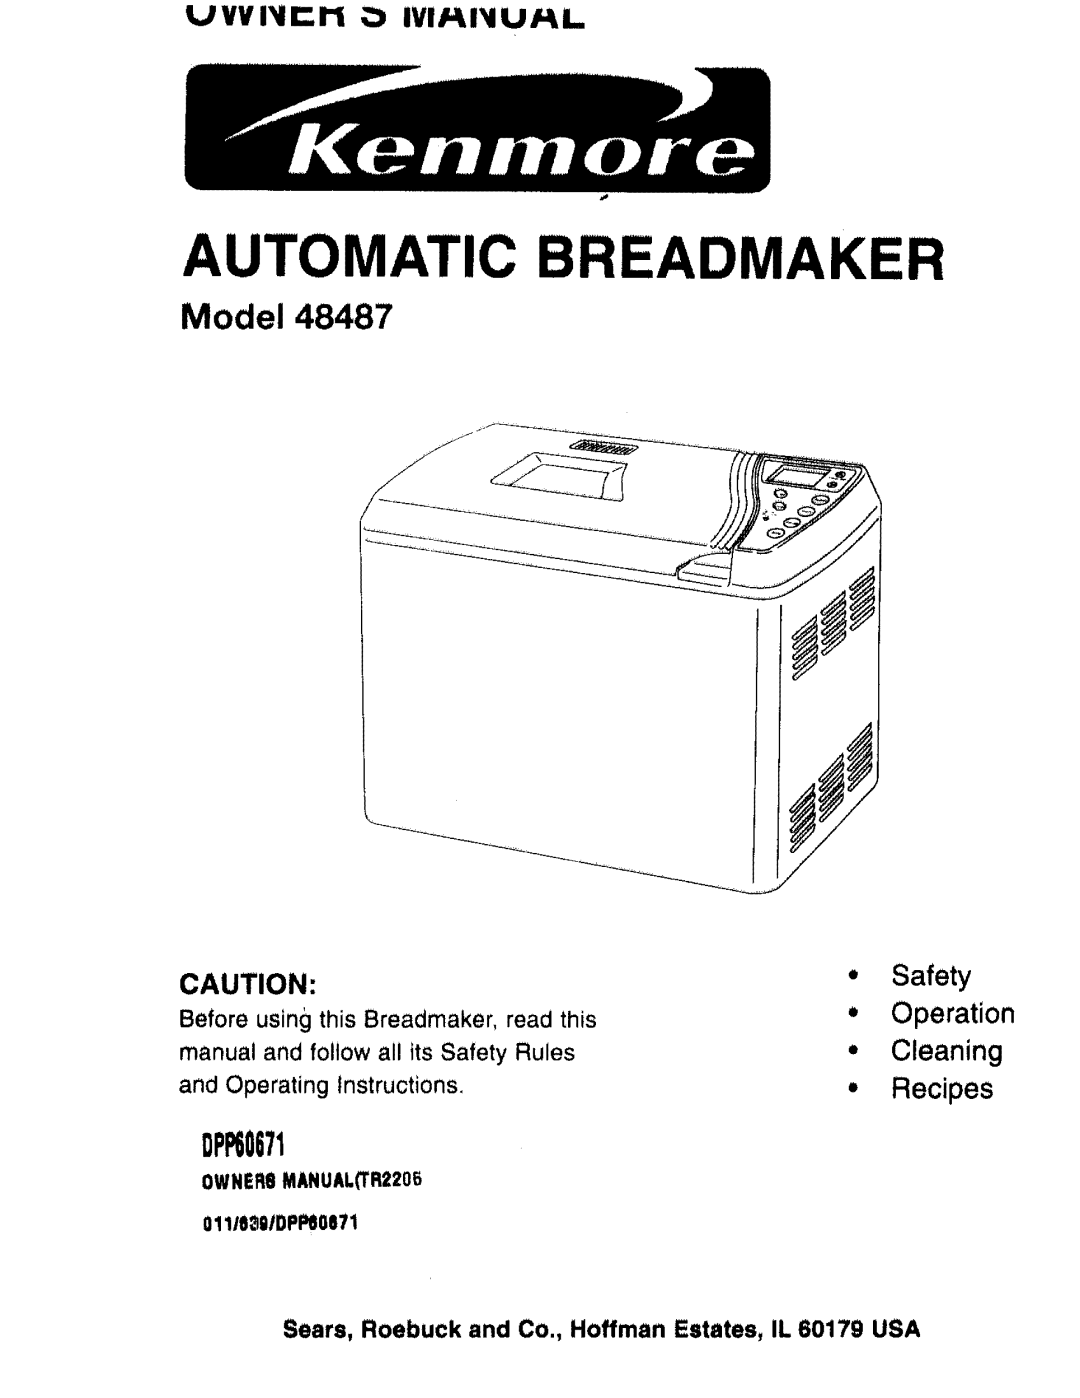 Kenmore 48487 manual Automatic Breadmaker, Safety Operation Cleaning Recipes, Before using this Breadmaker, read this 